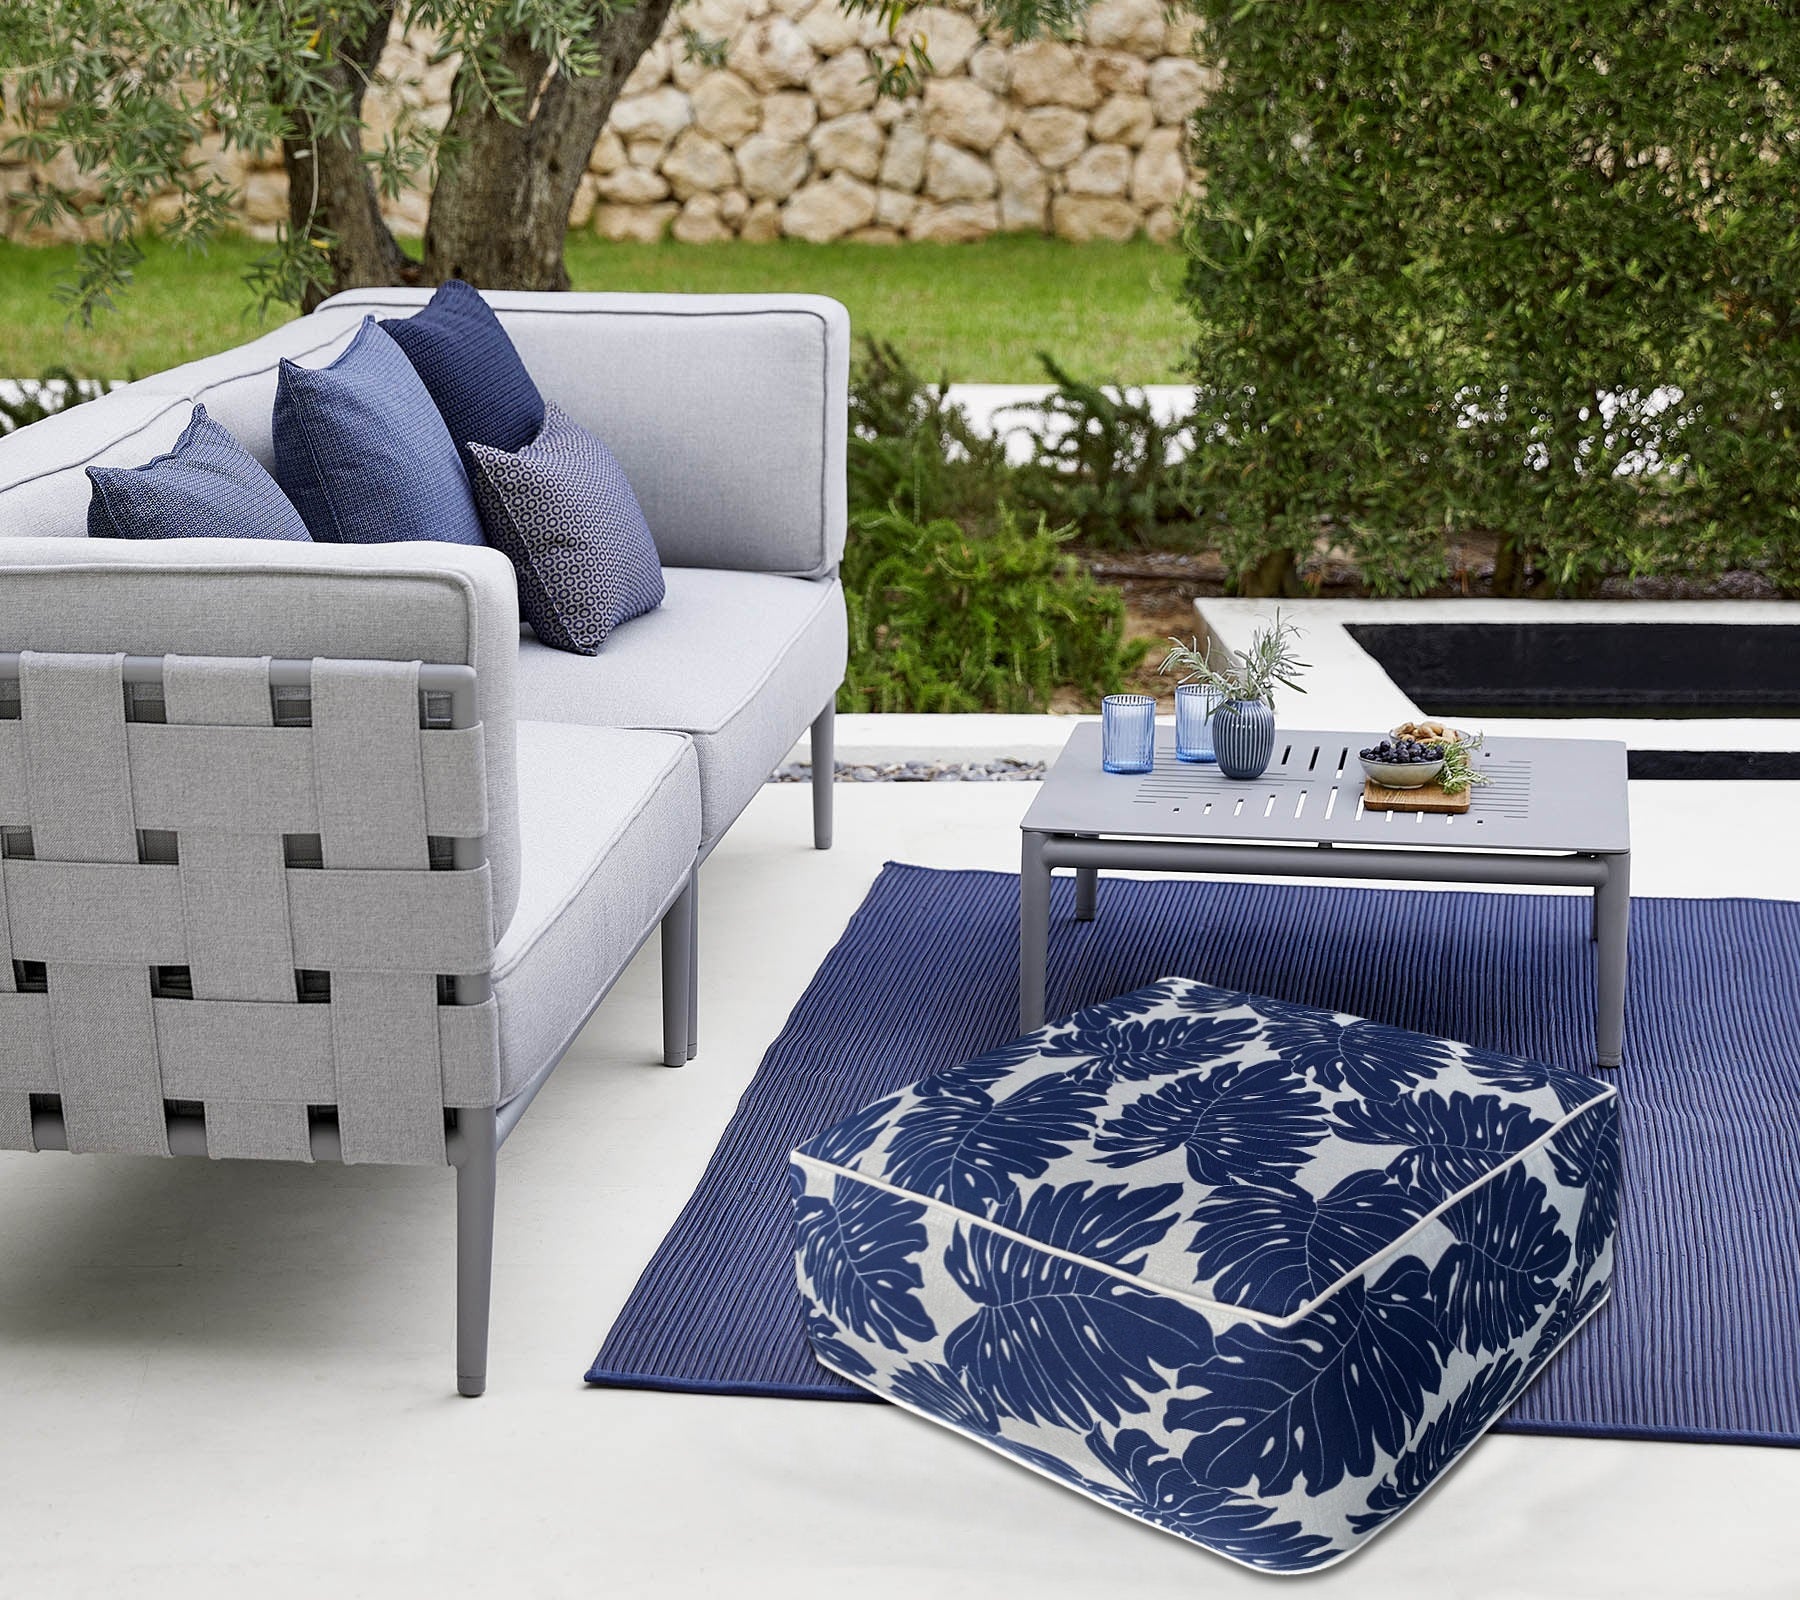 Outdoor Inflatable Ottoman Navy Leaves Square 23x23x9 Inch Patio Foot Stools and Ottomans